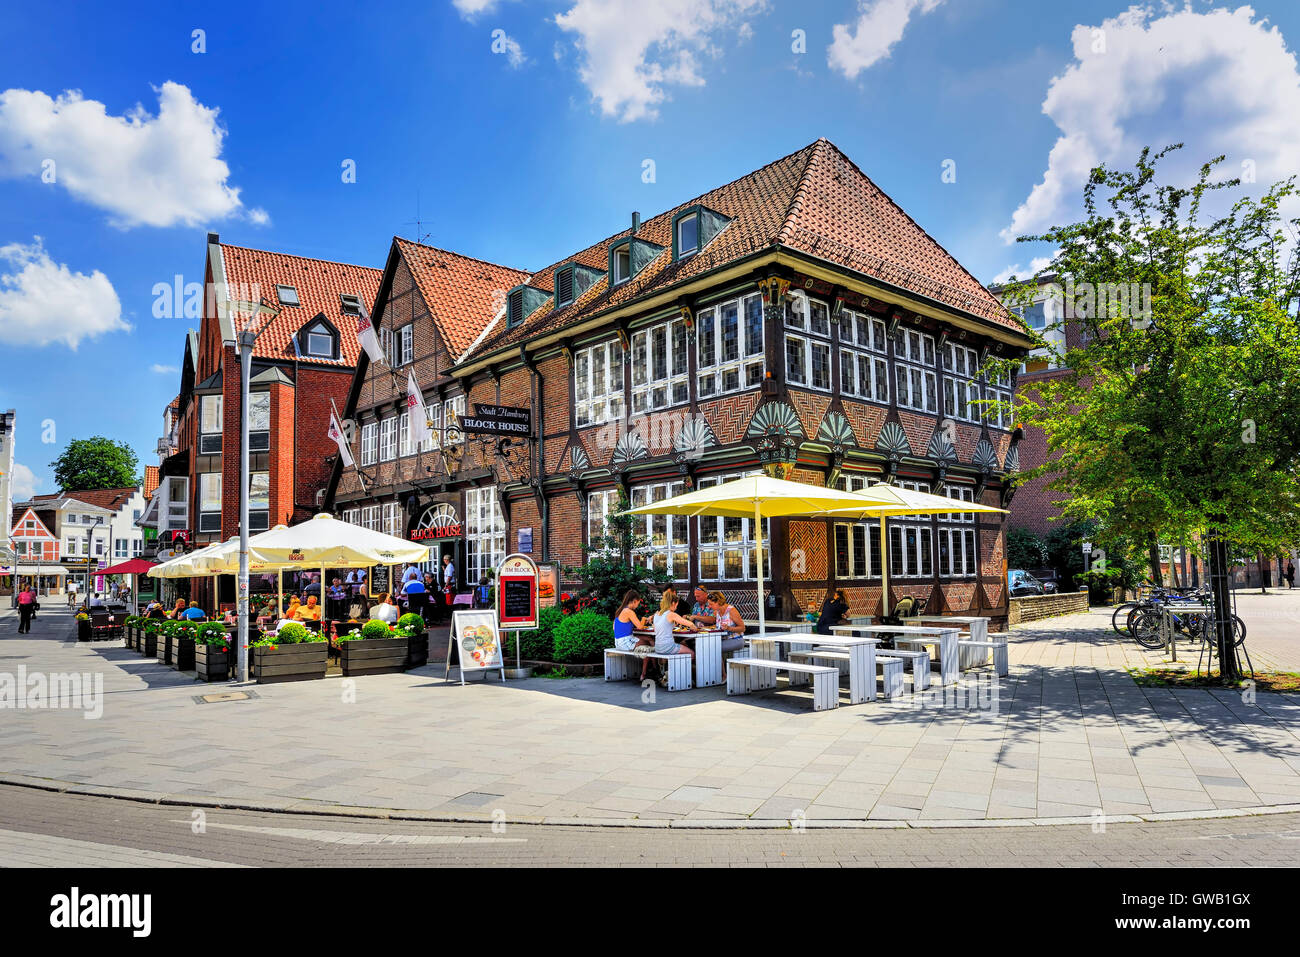 Historical half-timbered house with the restaurant block House in the shopping street Saxon's gate in mountain village, Hamburg, Stock Photo